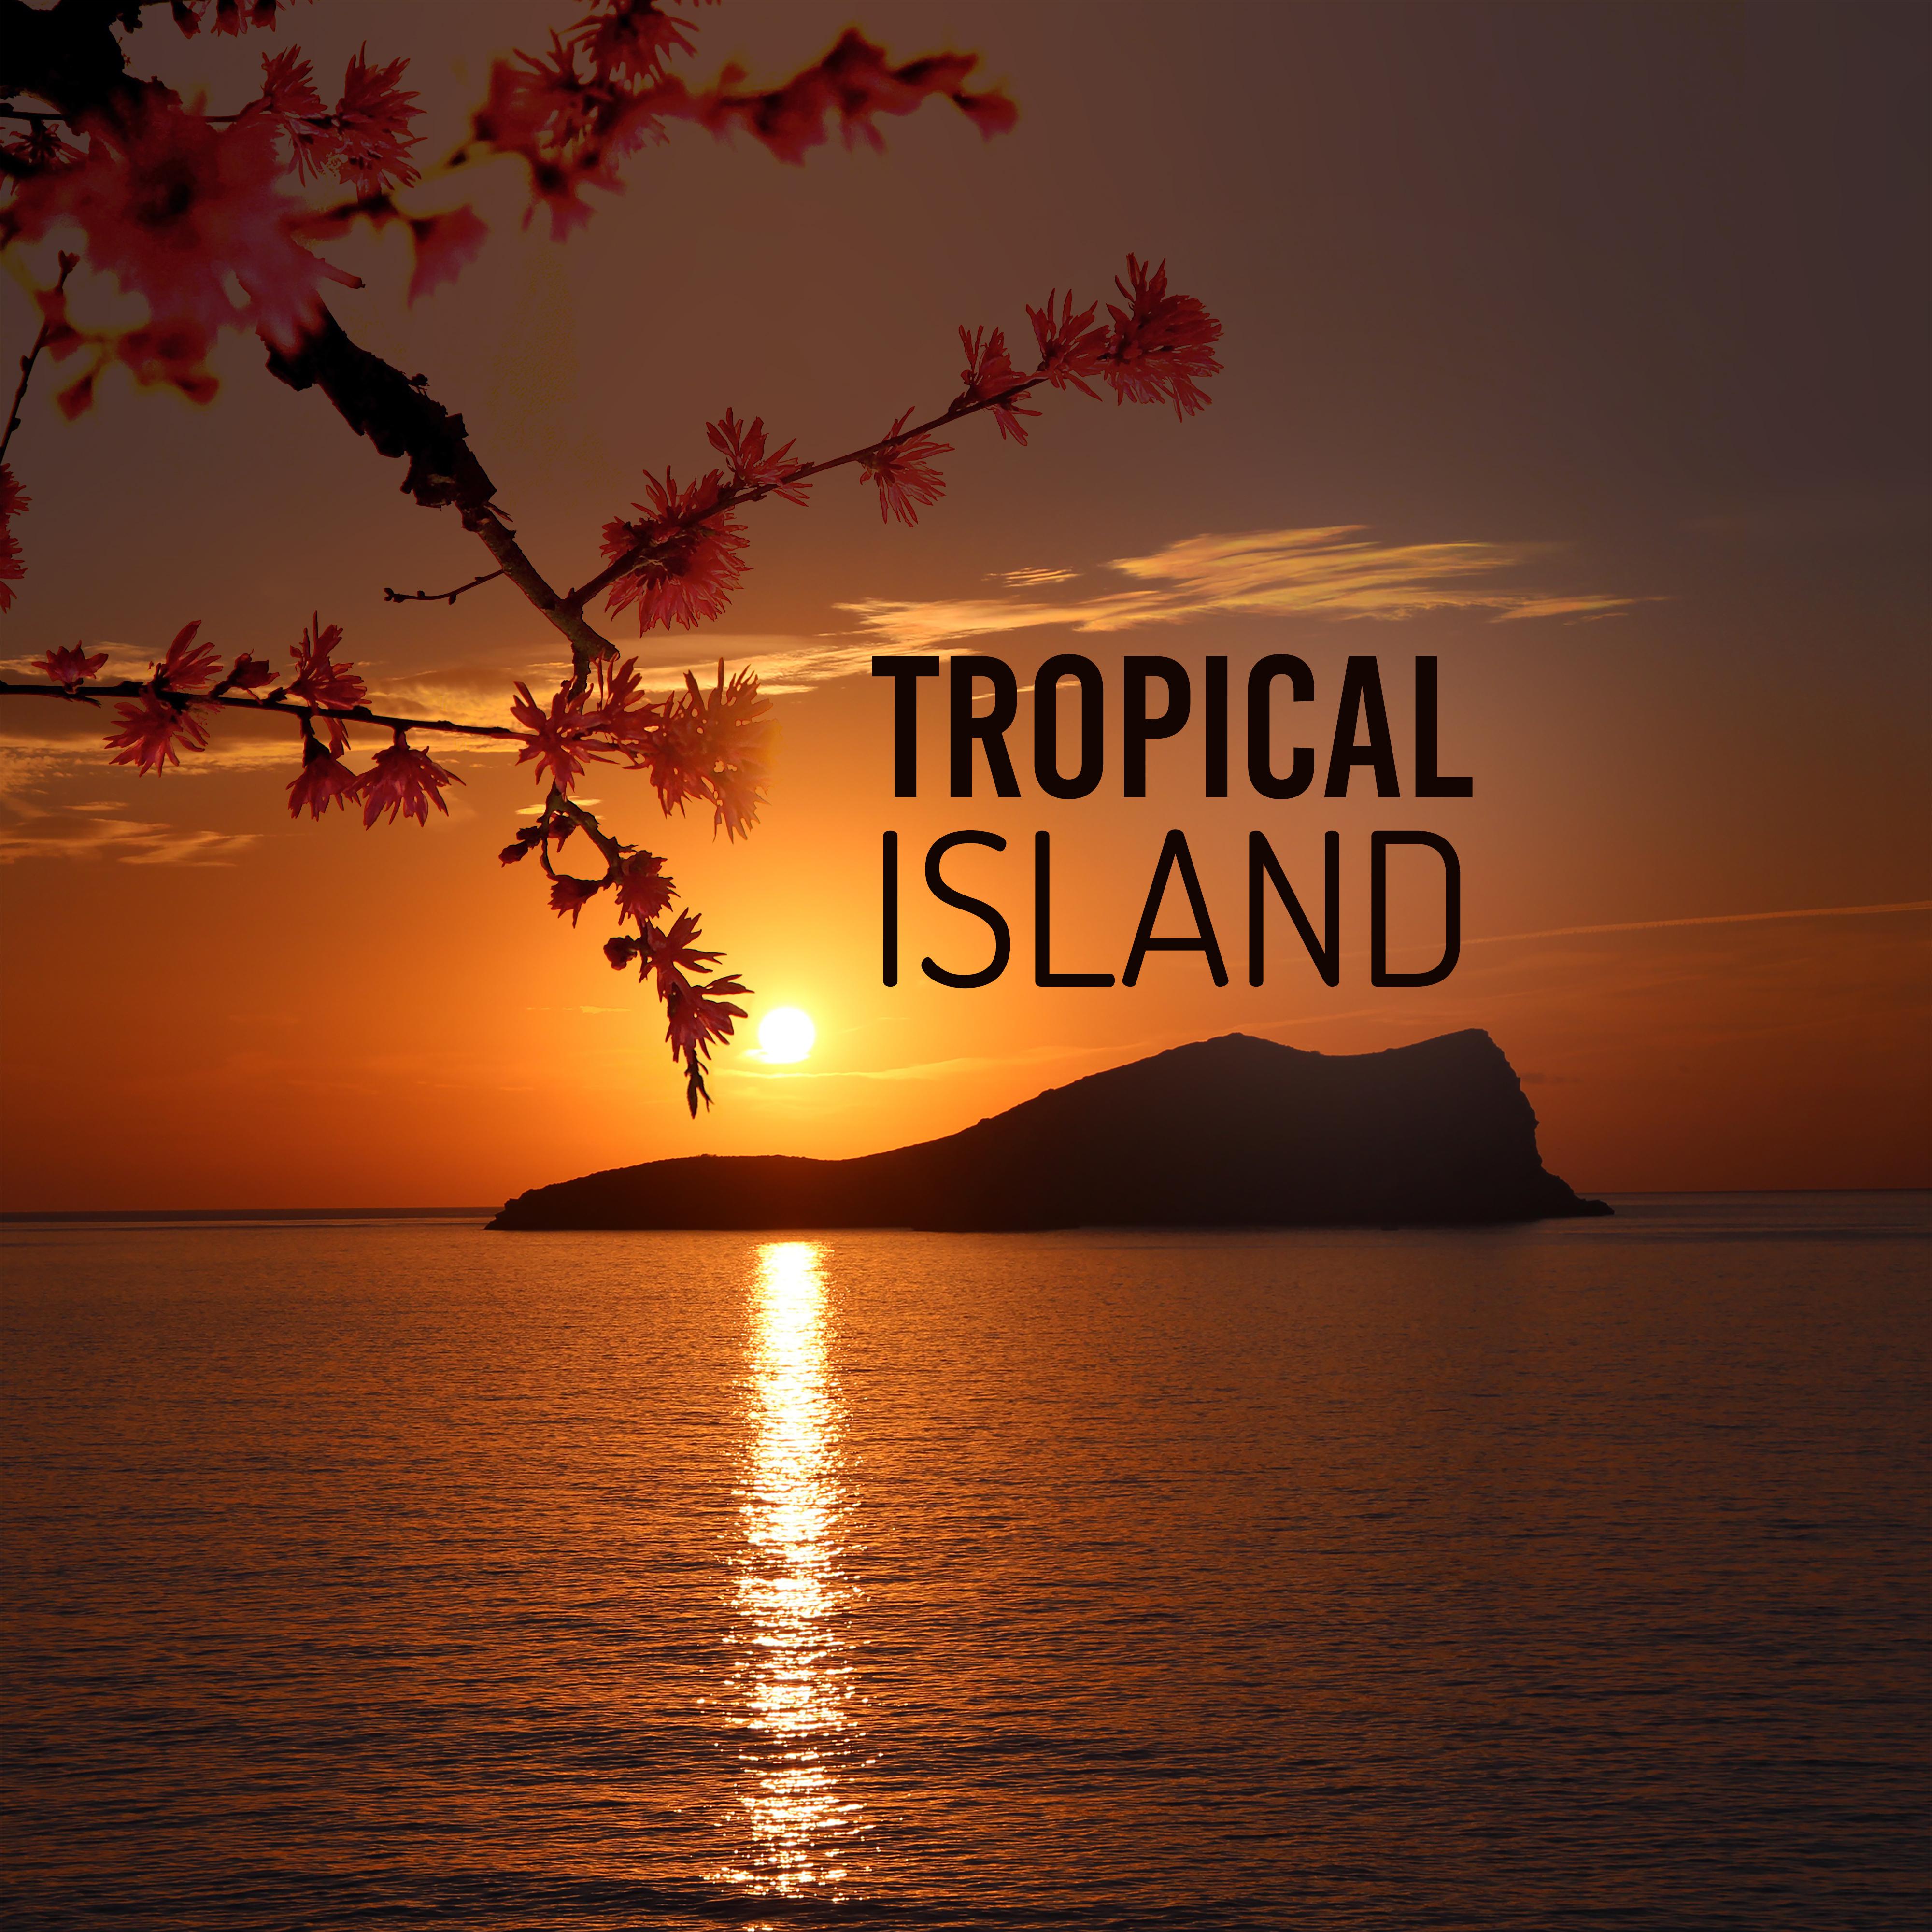 Tropical Island  Chill Out Music, Summertime Sounds, No More Stress, Holiday Relaxation